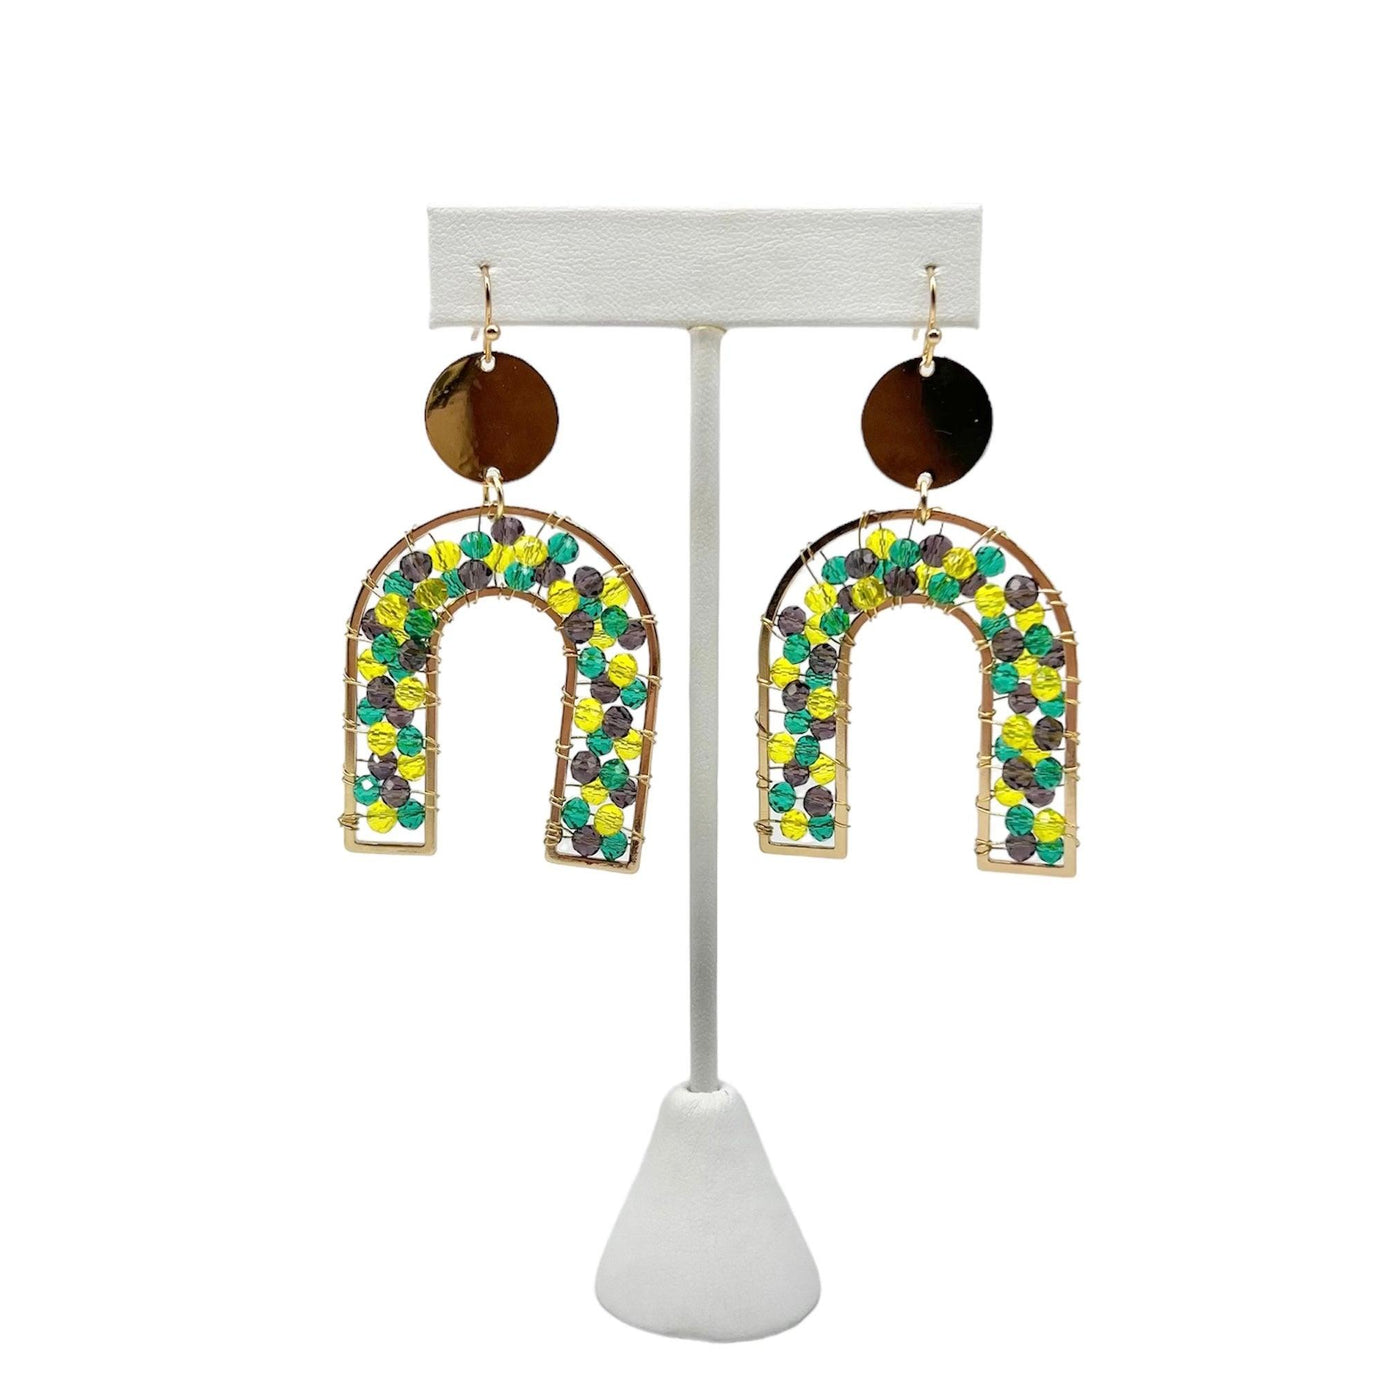 Beaded Arch Drop Earrings with Gold Tone Accents